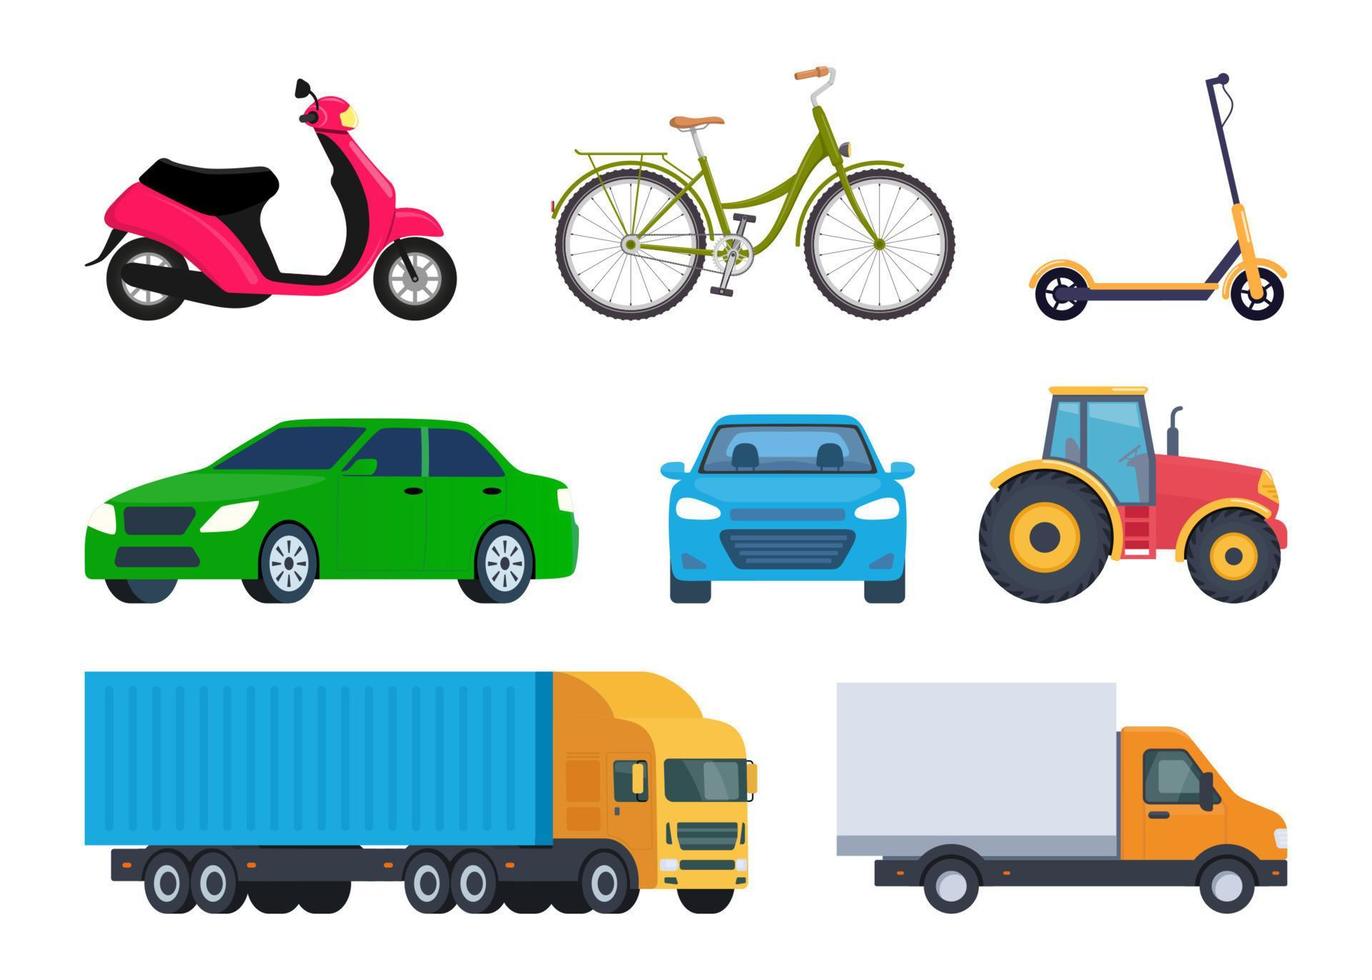 Vehicles, set. Car, bicycle, moped, electric scooter, truck, tractor. Vector illustration in flat style.